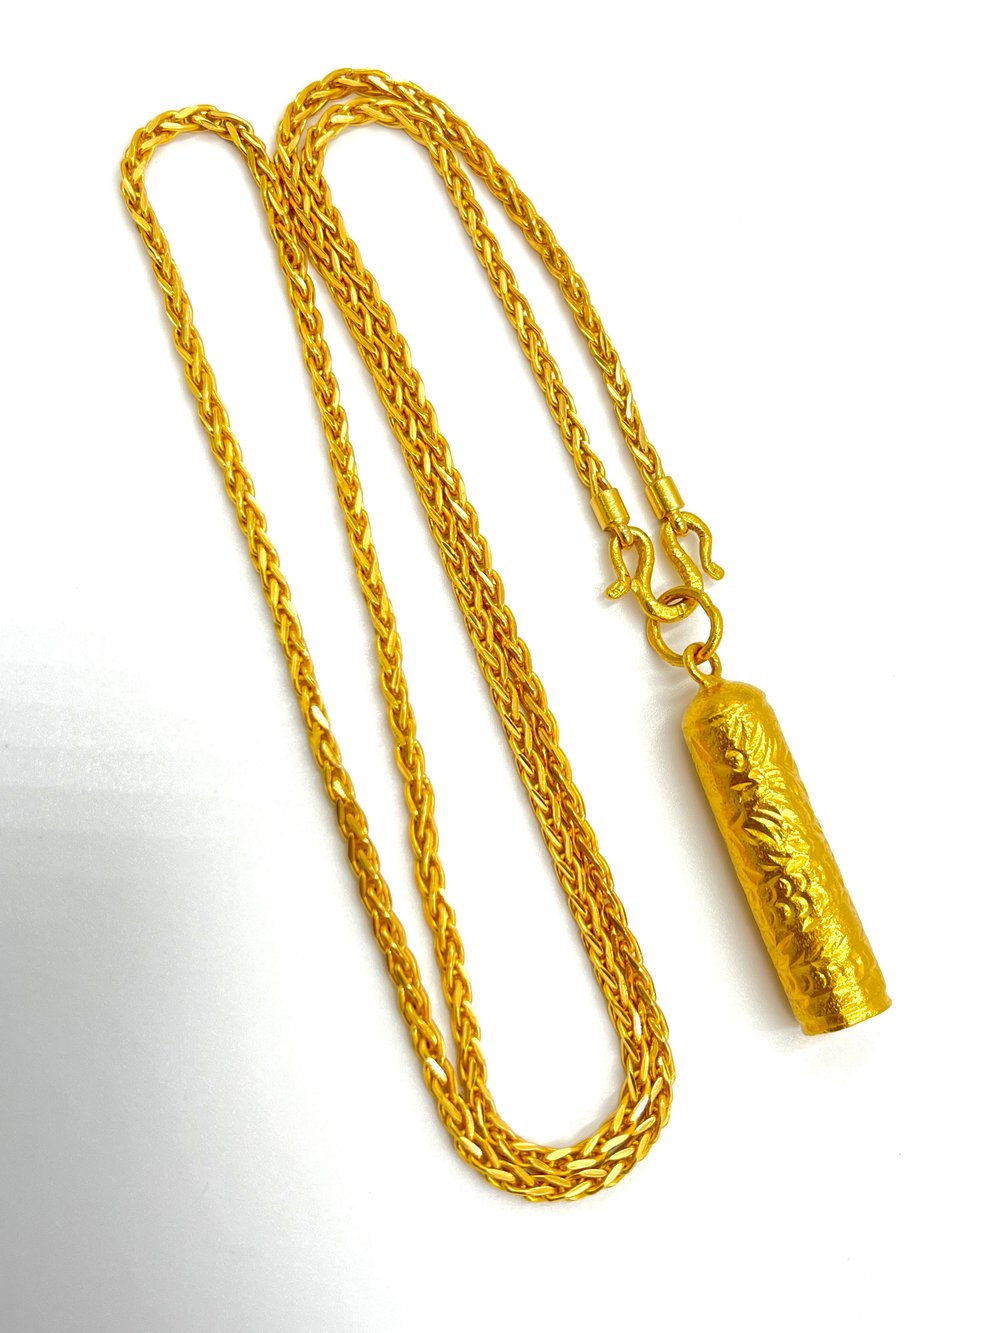 24k 26” Chain WITHOUT Pendant (Chain Only)